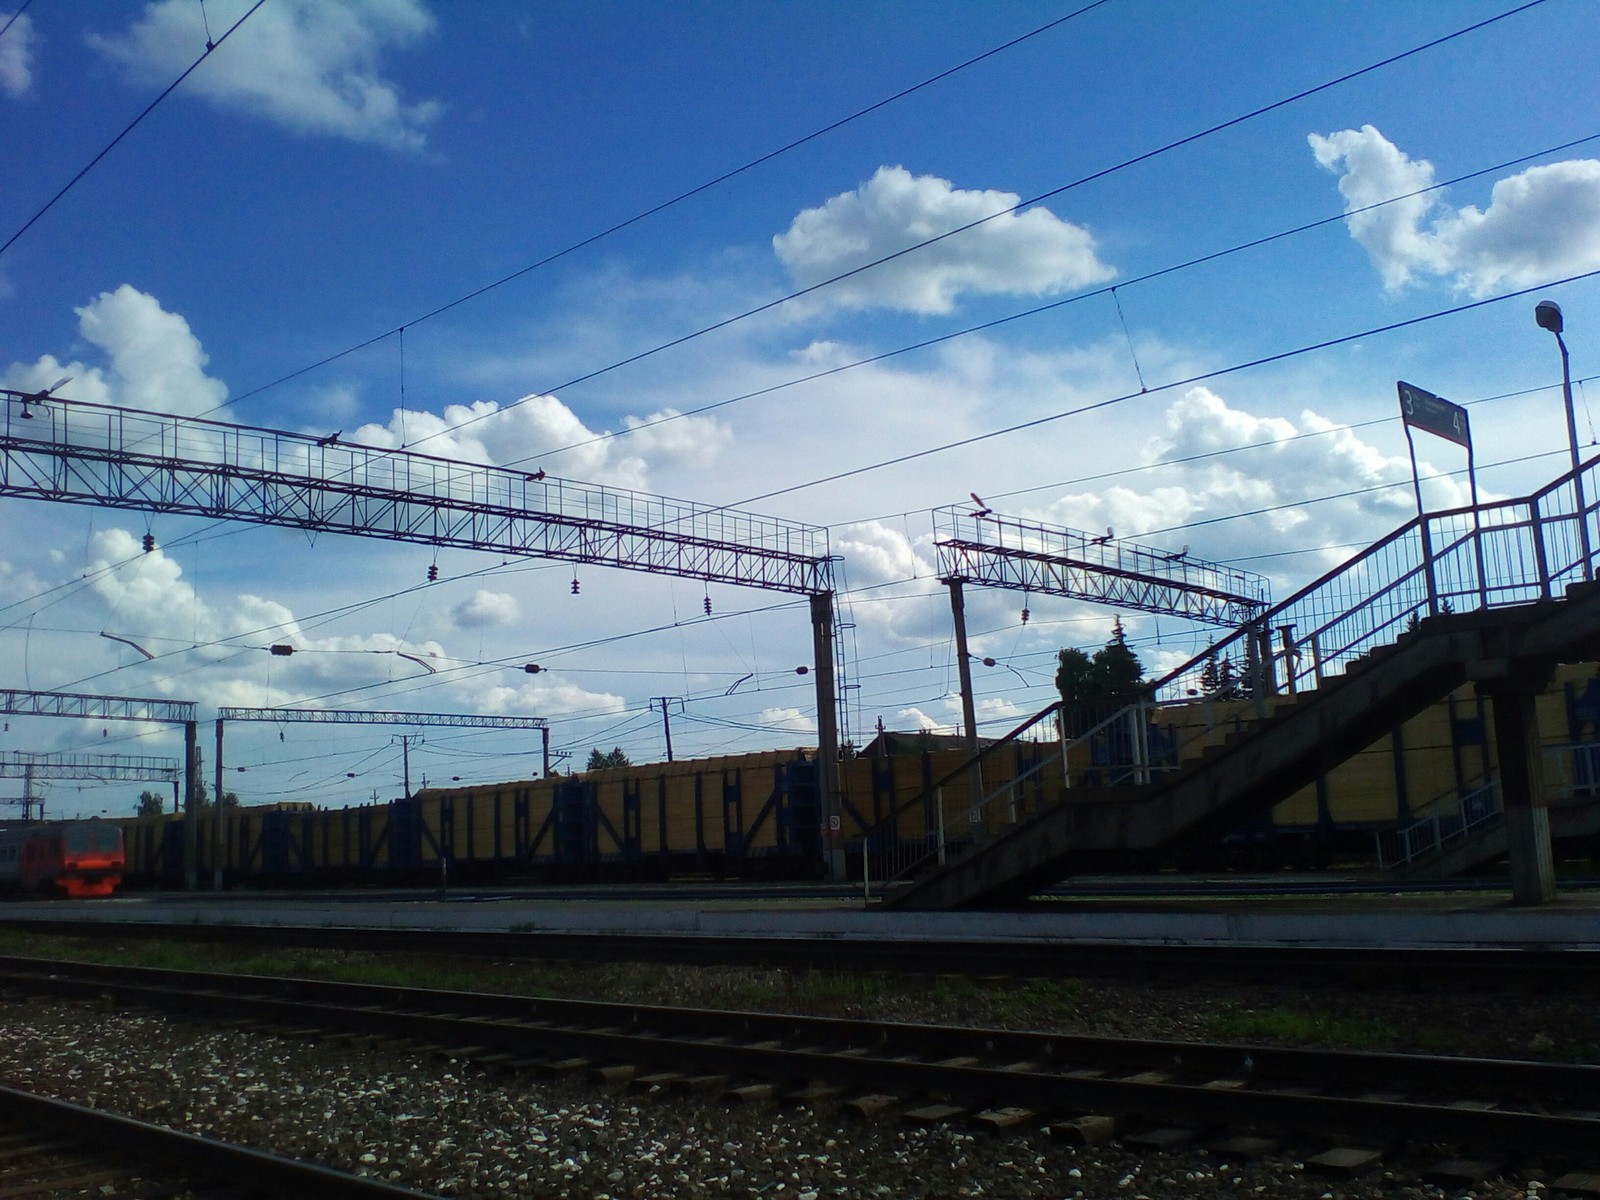 A little bit of sky - My, The photo, Sky, Railway station, Clouds